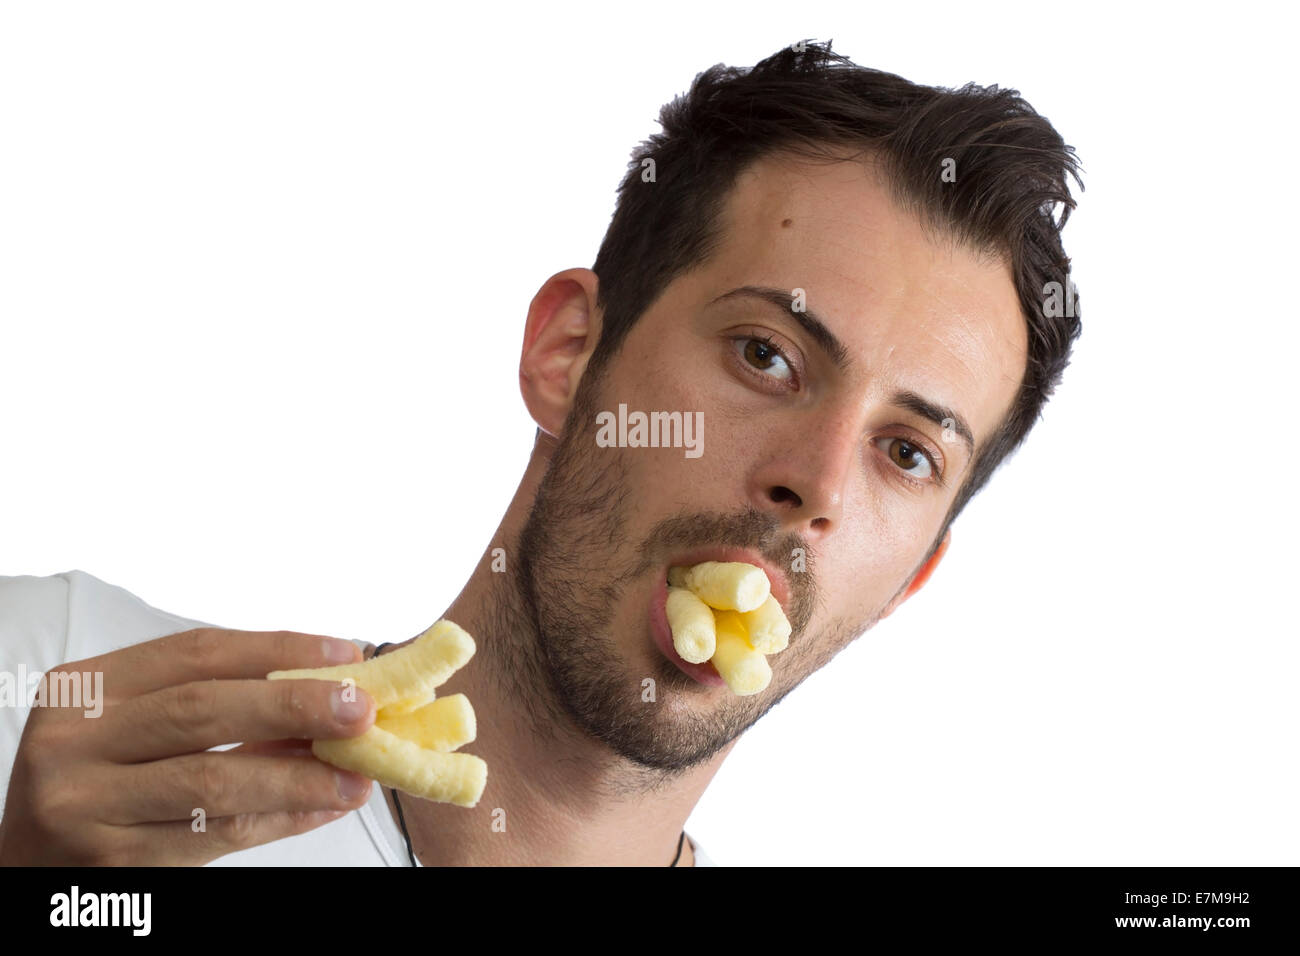 Man eating puffs isolated over white background Stock Photo